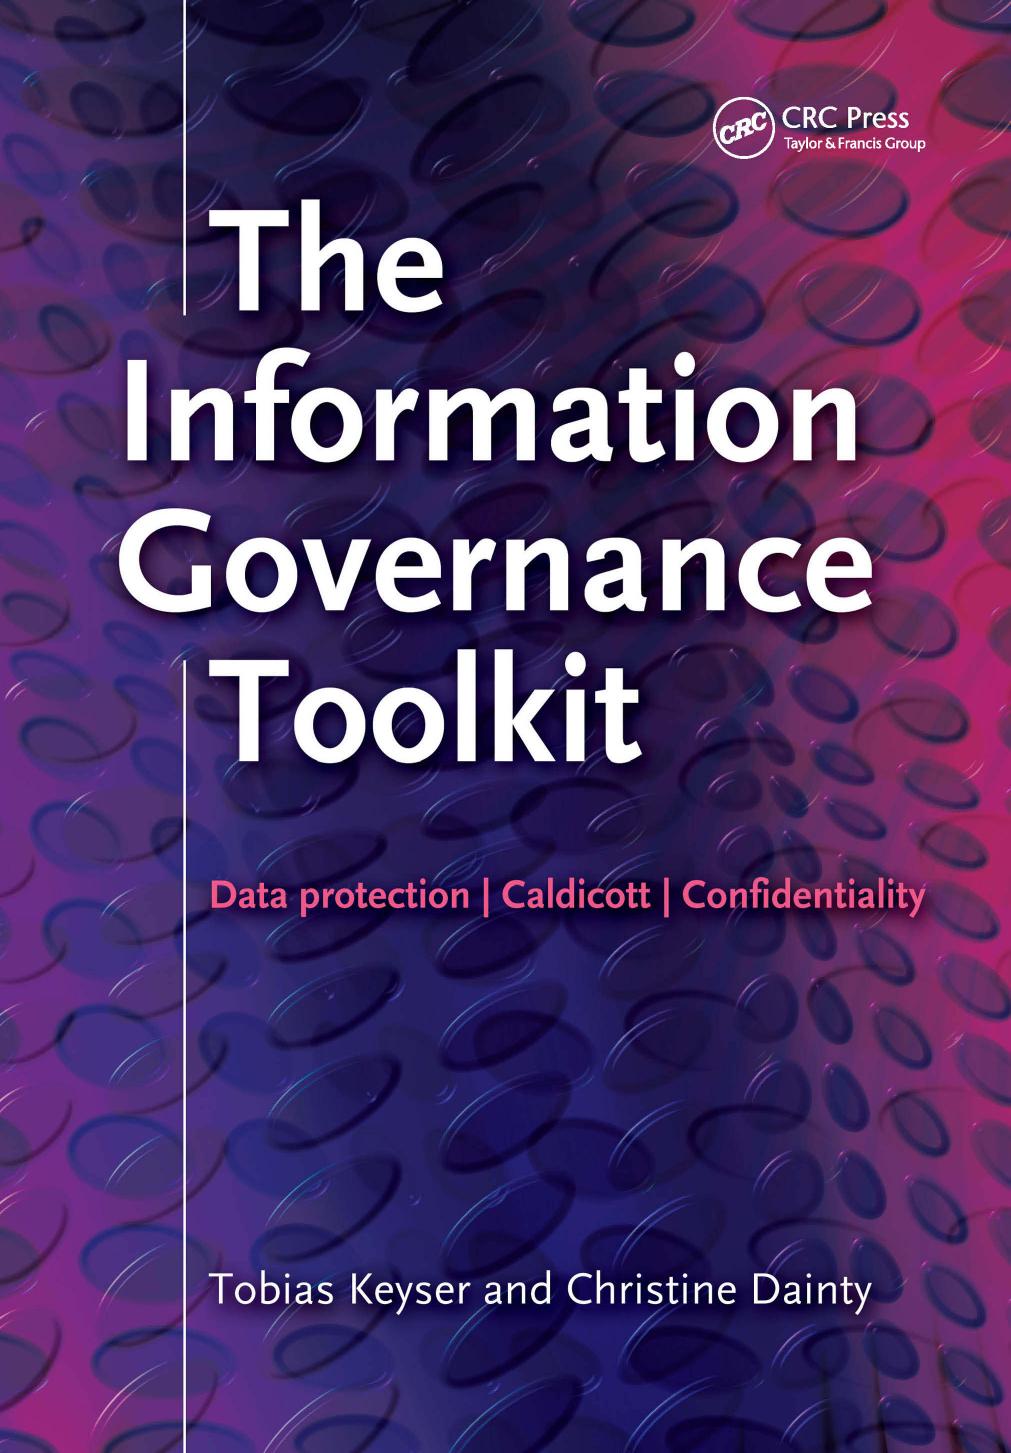 The Information Governance Toolkit: Data Protection, Caldicott, Confidentiality